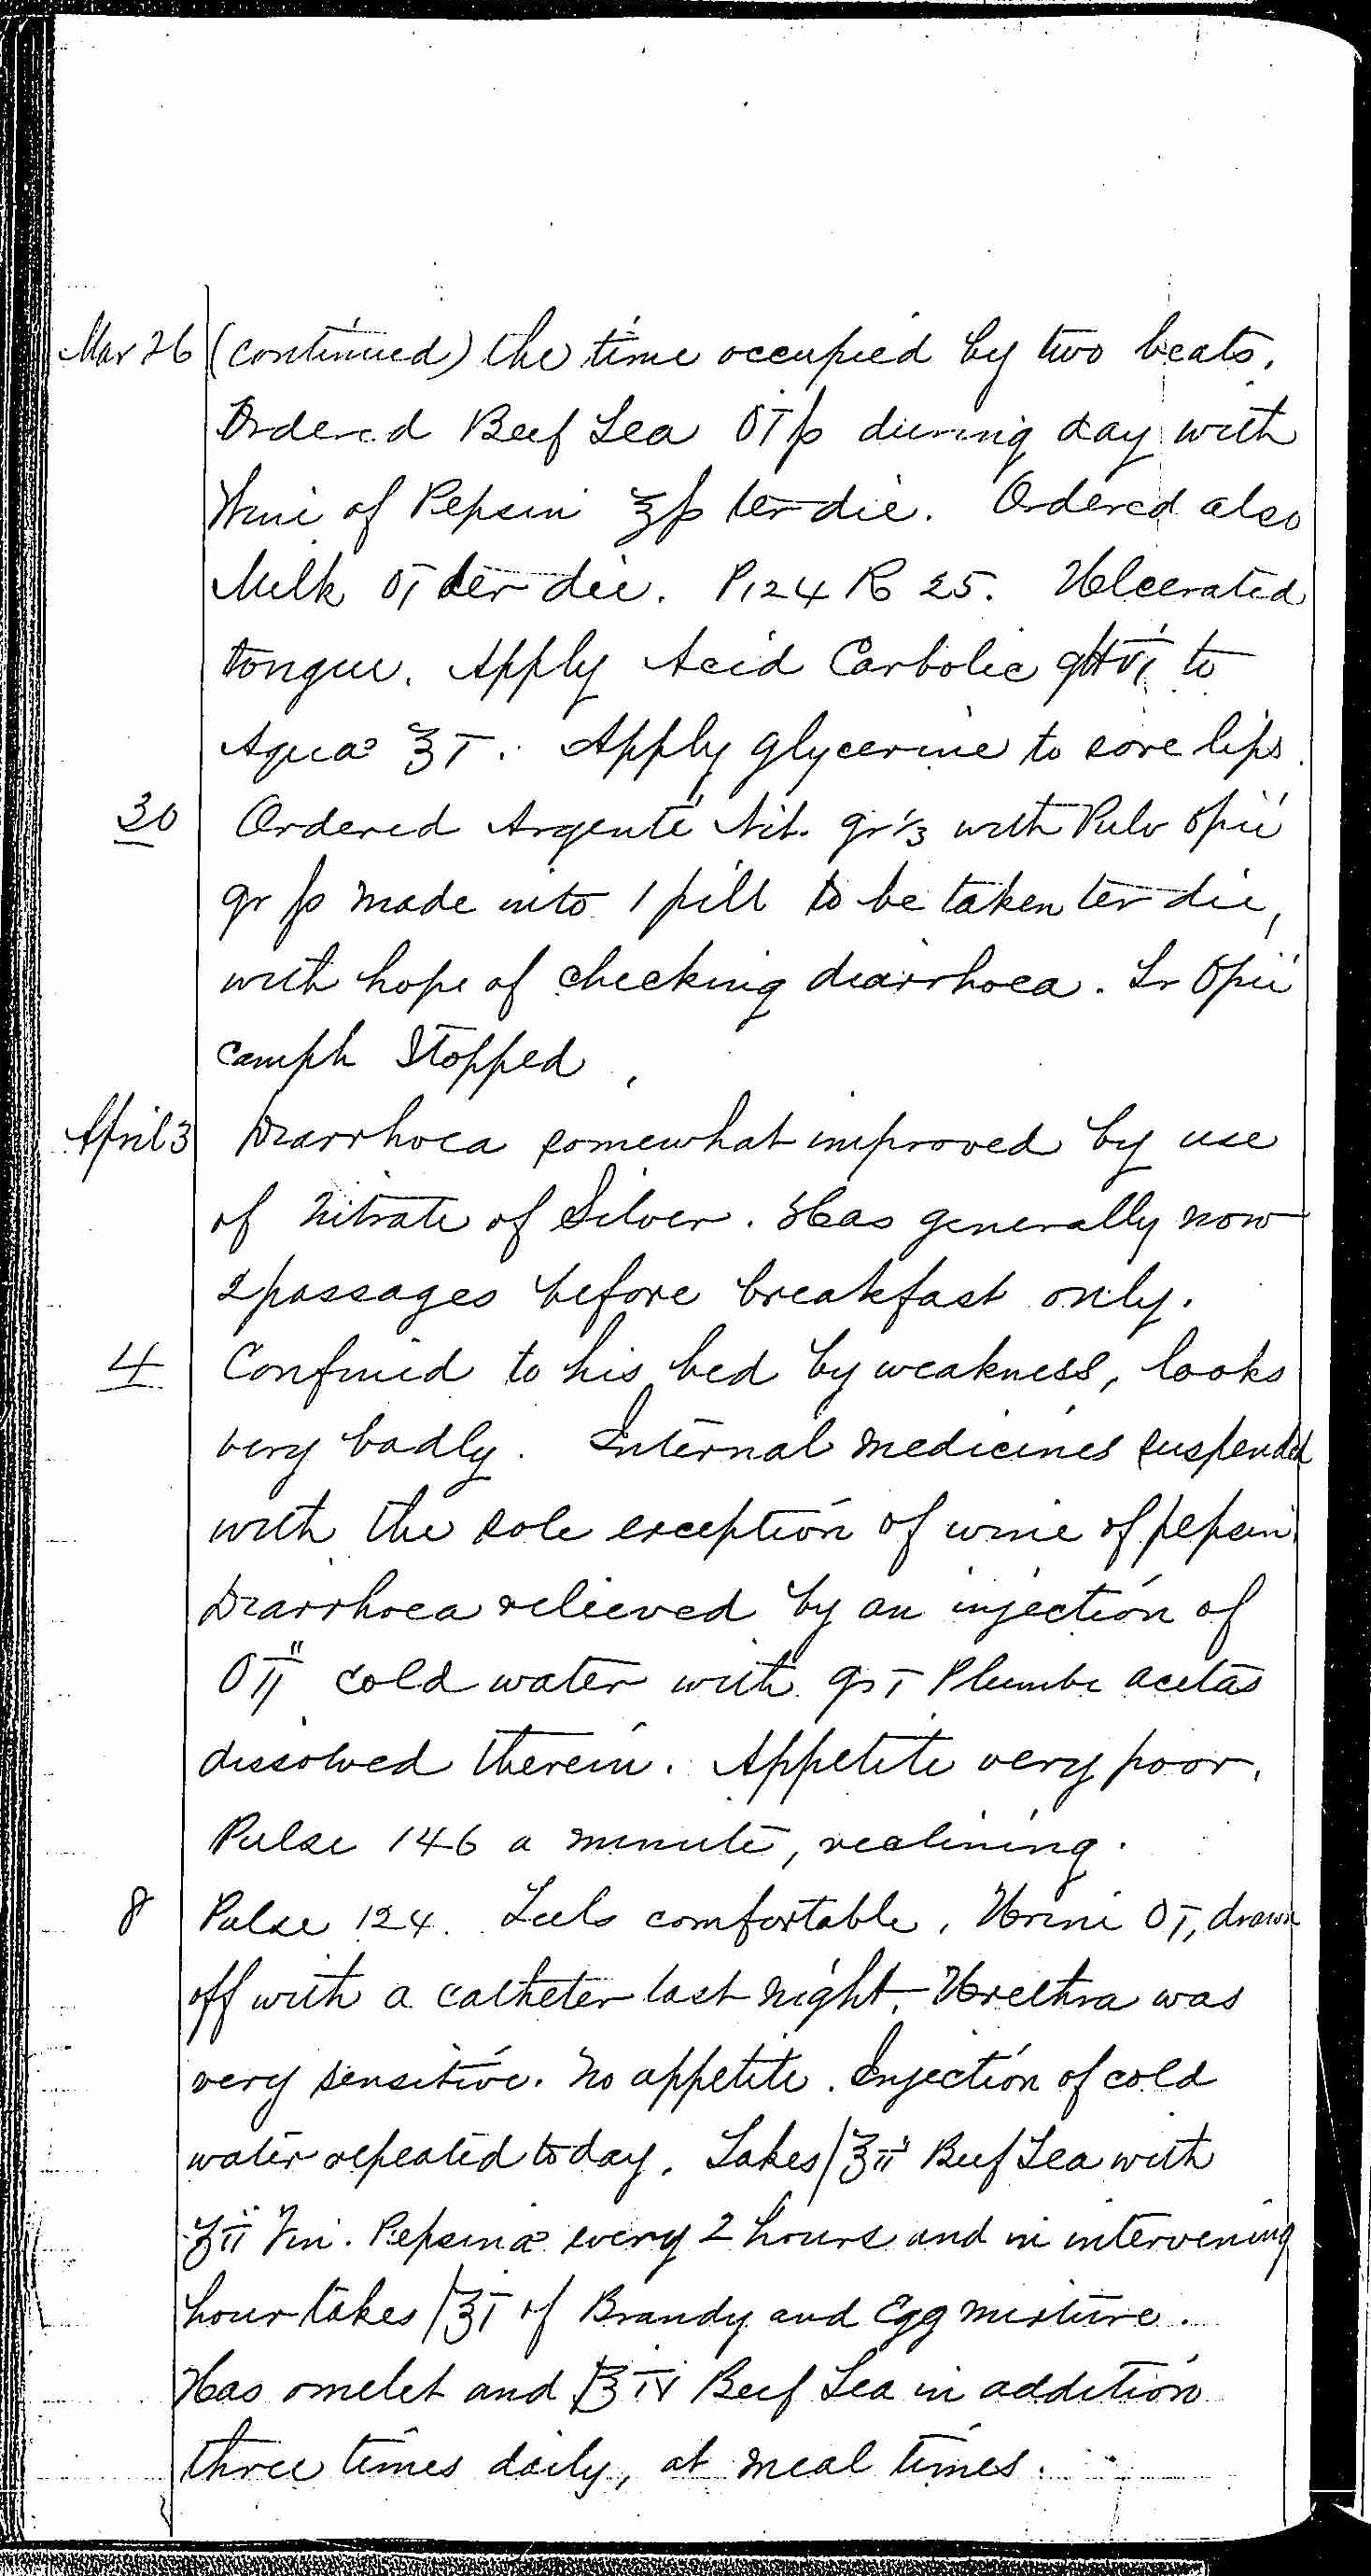 Entry for William Bathwell (page 12 of 13) in the log Hospital Tickets and Case Papers - Naval Hospital - Washington, D.C. - 1868-69